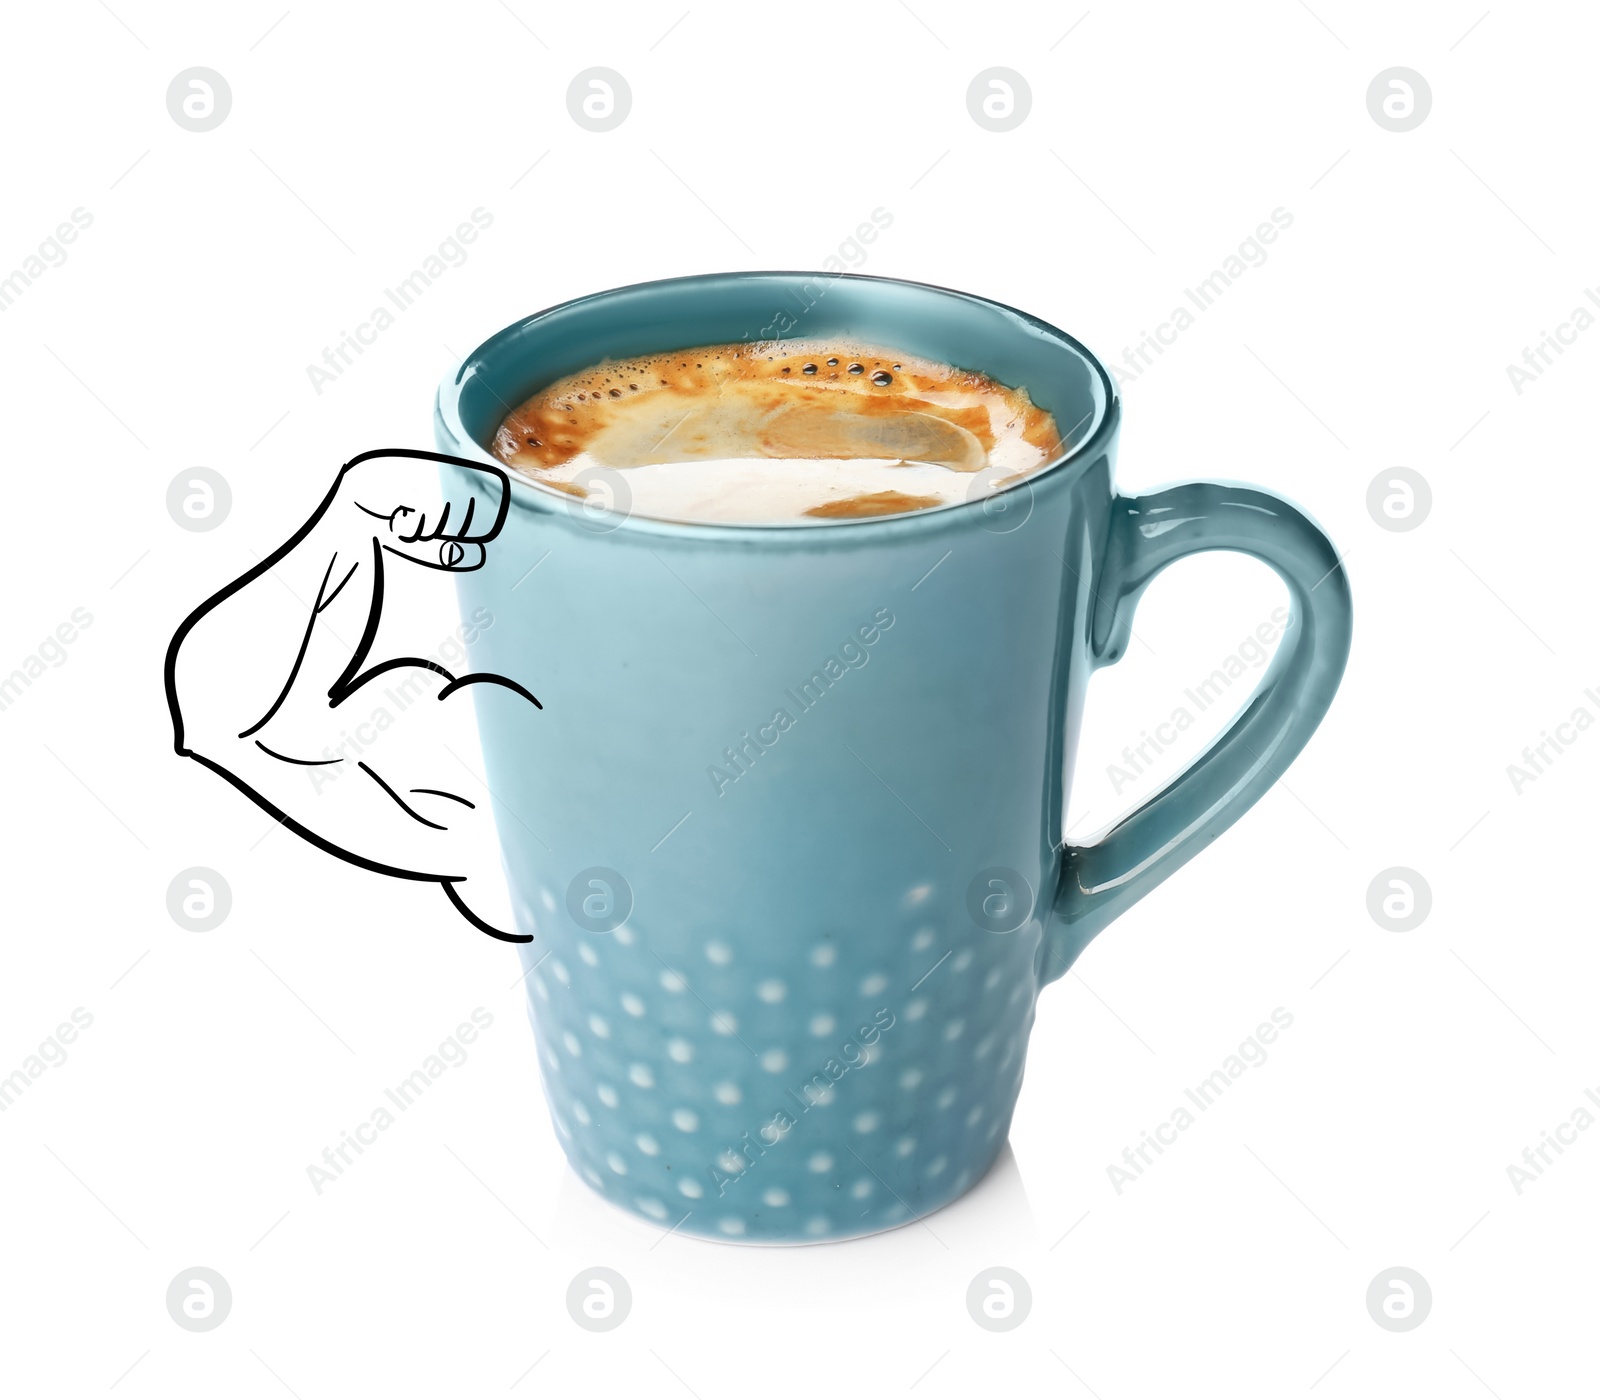 Image of Strong coffee. Cup with illustration of bodybuilder's arm on white background